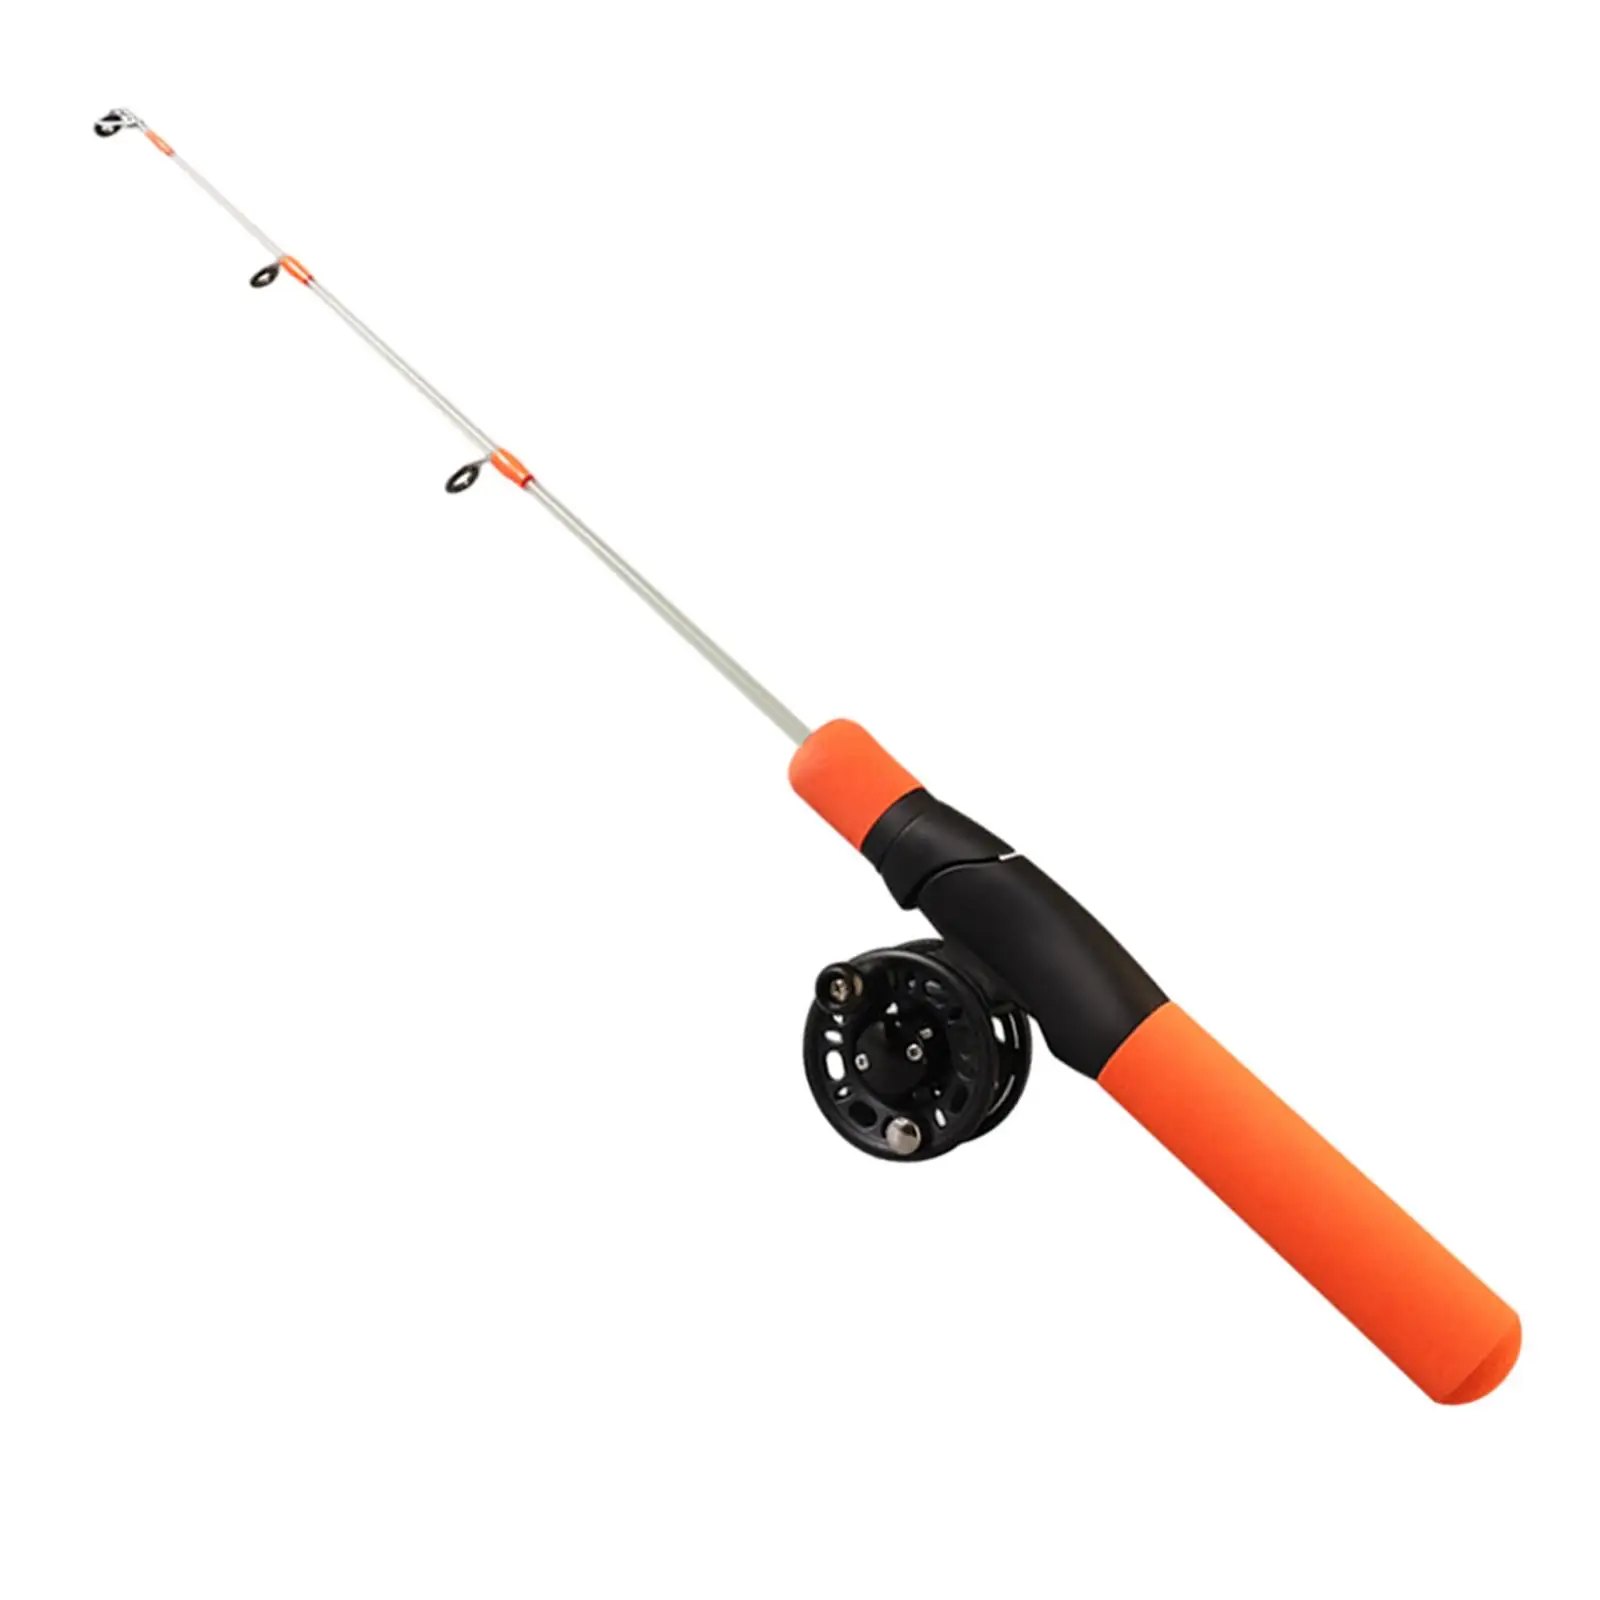 Ice Fishing Pole Portable Comfortable Grip Fishing Accessory Practical Fishing Tackle Fishing Tools for Outdoor River Fishing